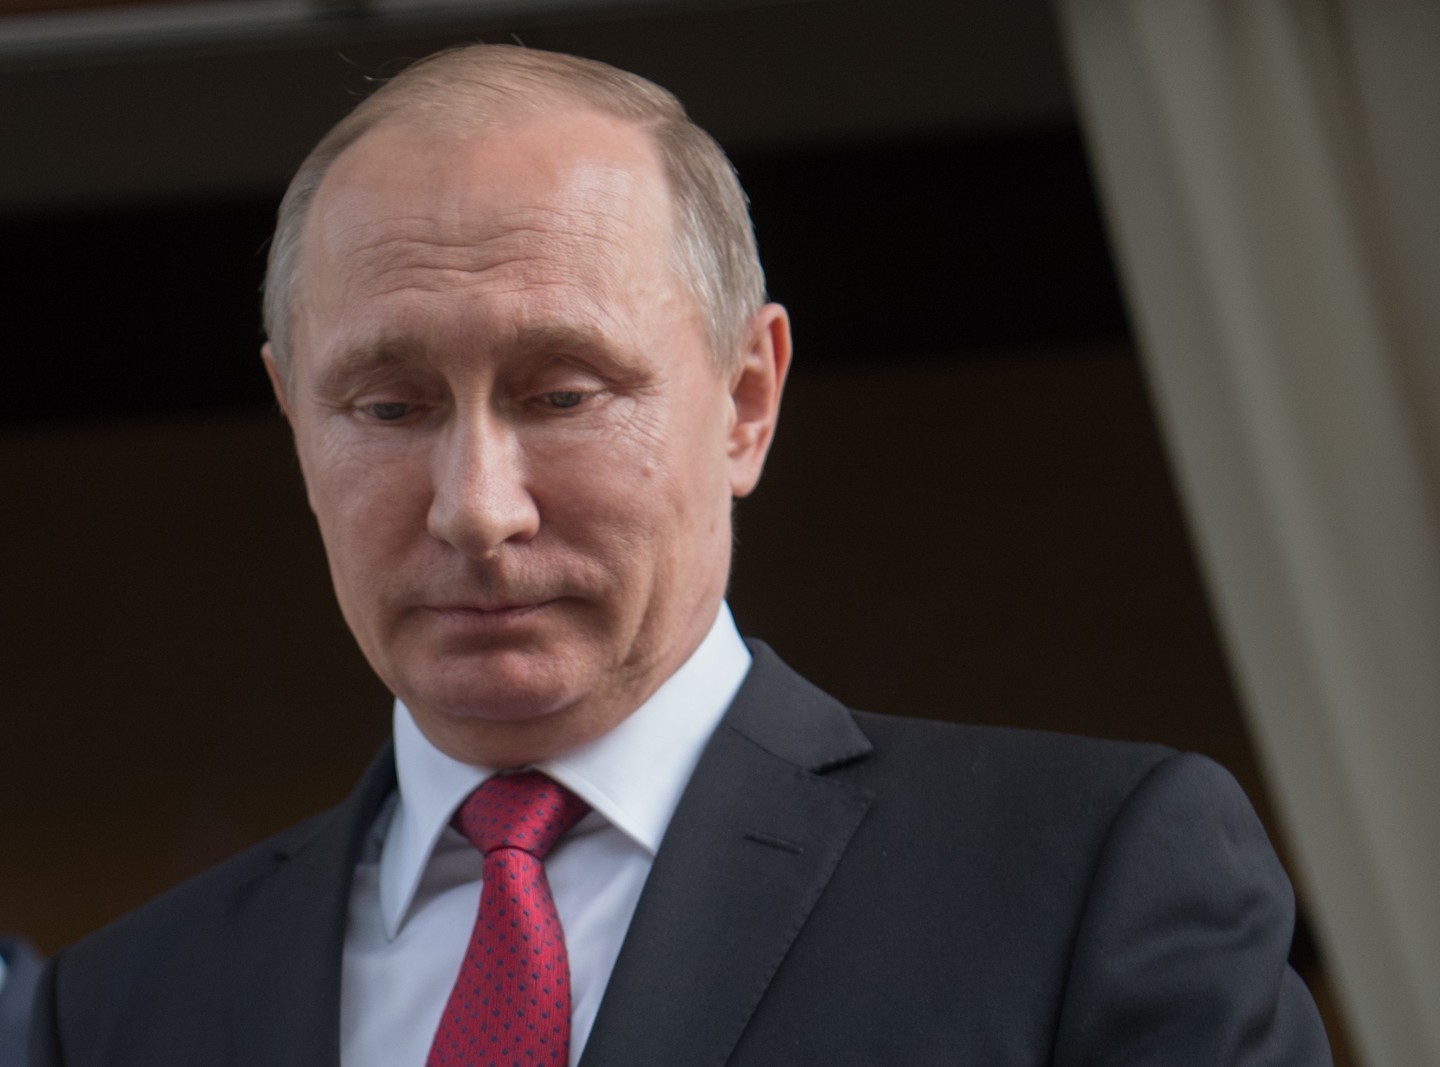 Putin on the situation in Ukraine: “They put themselves in this situation, like chestnuts into the fire”